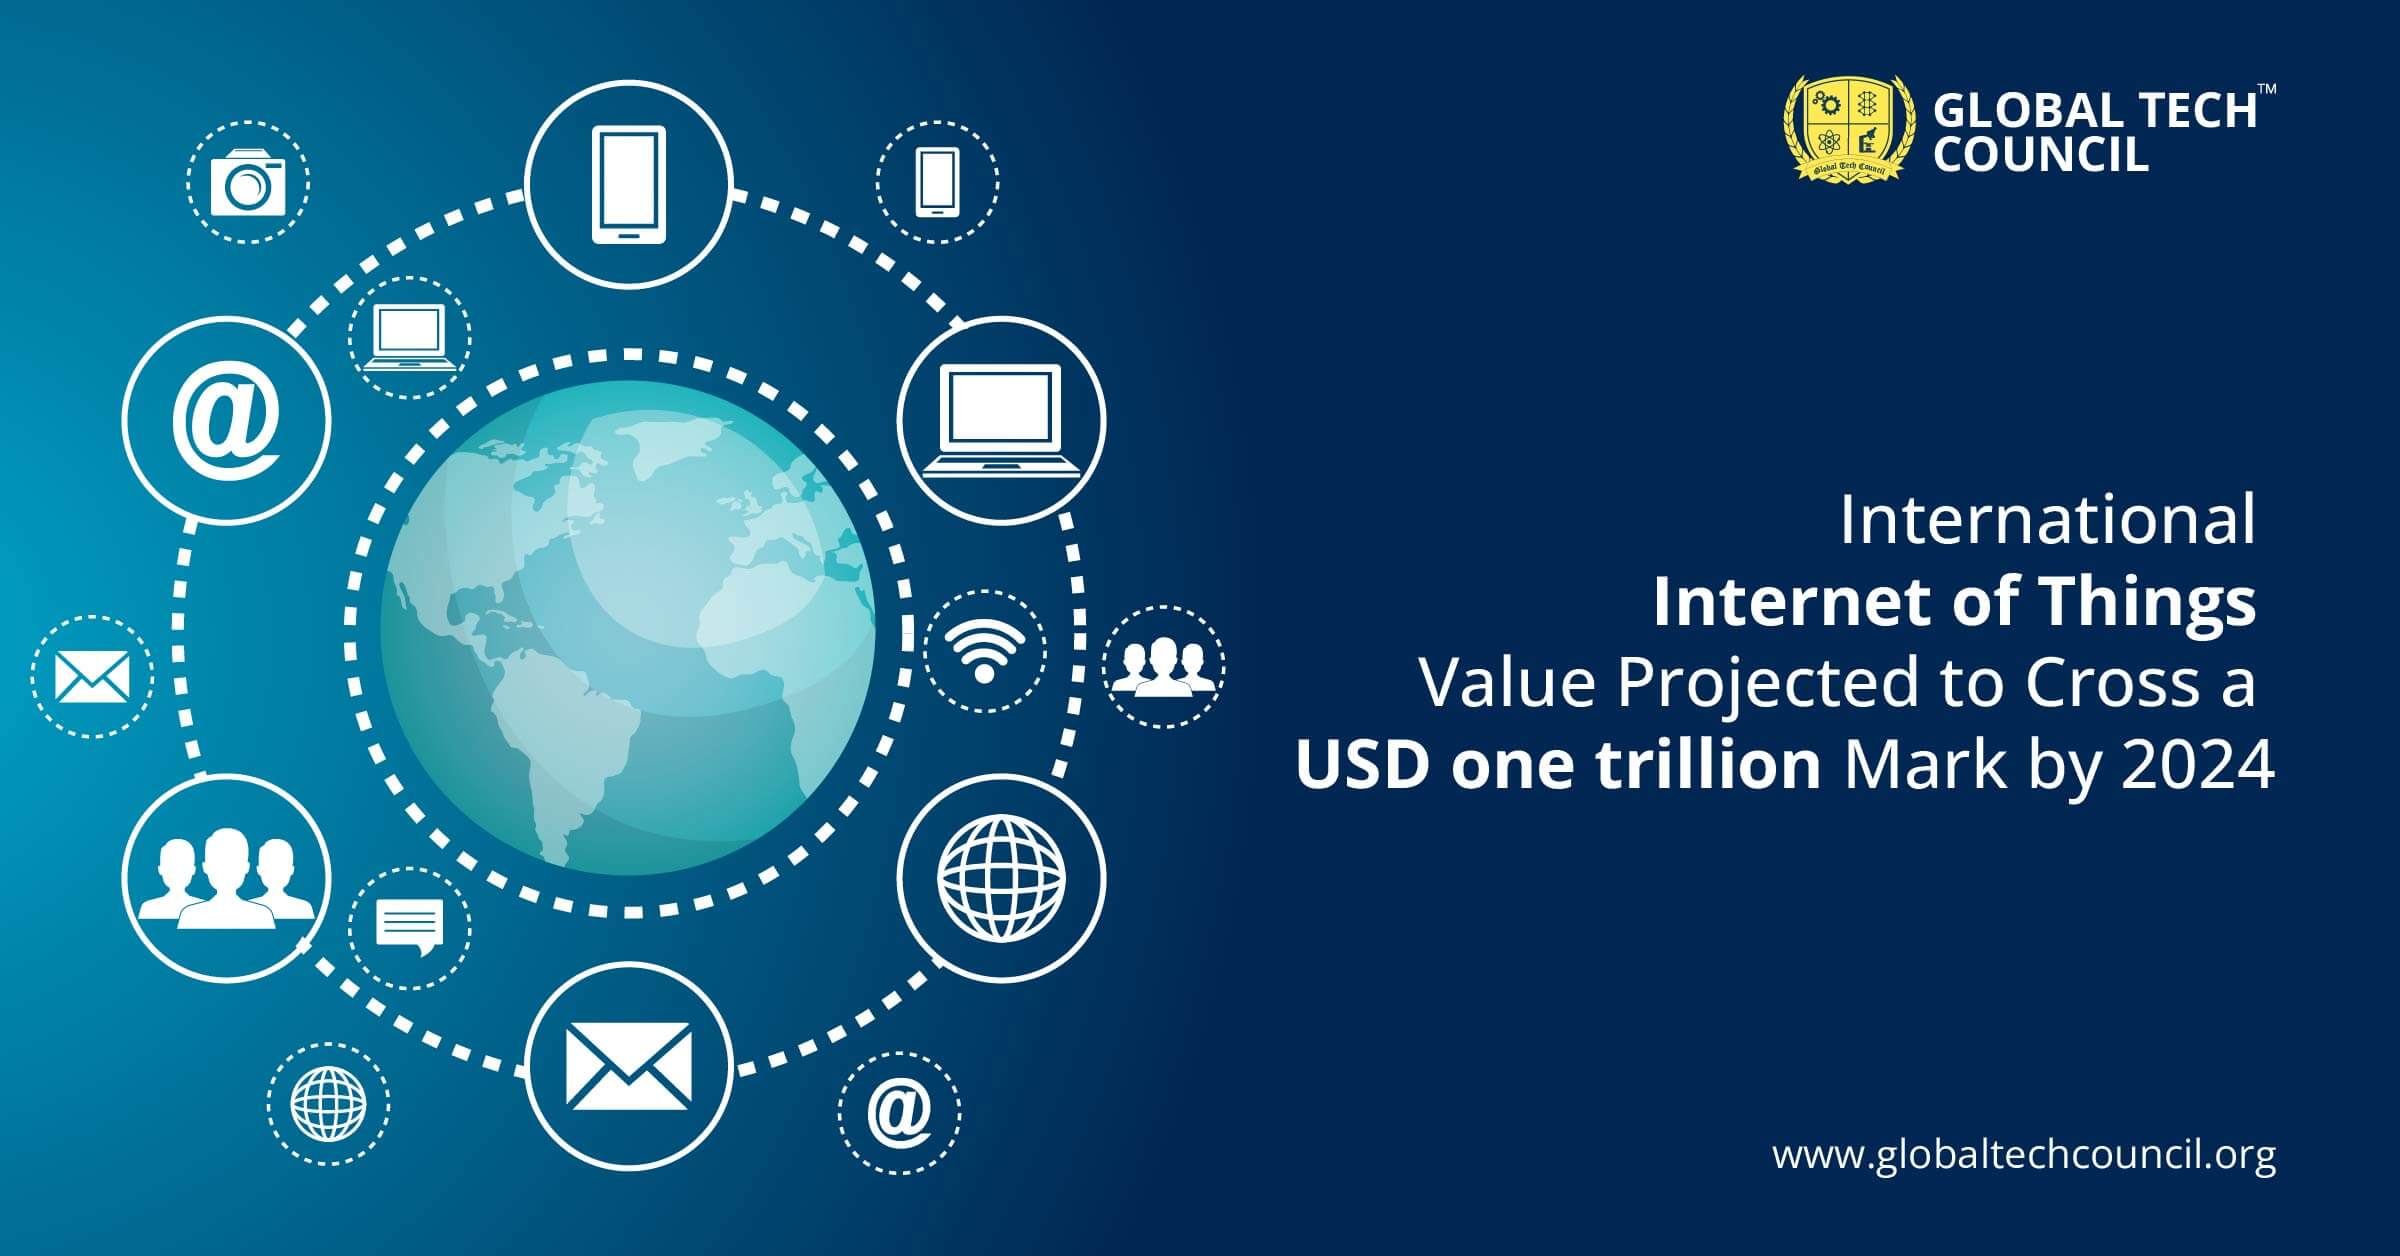 International Internet of Things Value Projected to Cross a USD one trillion Mark by 2024